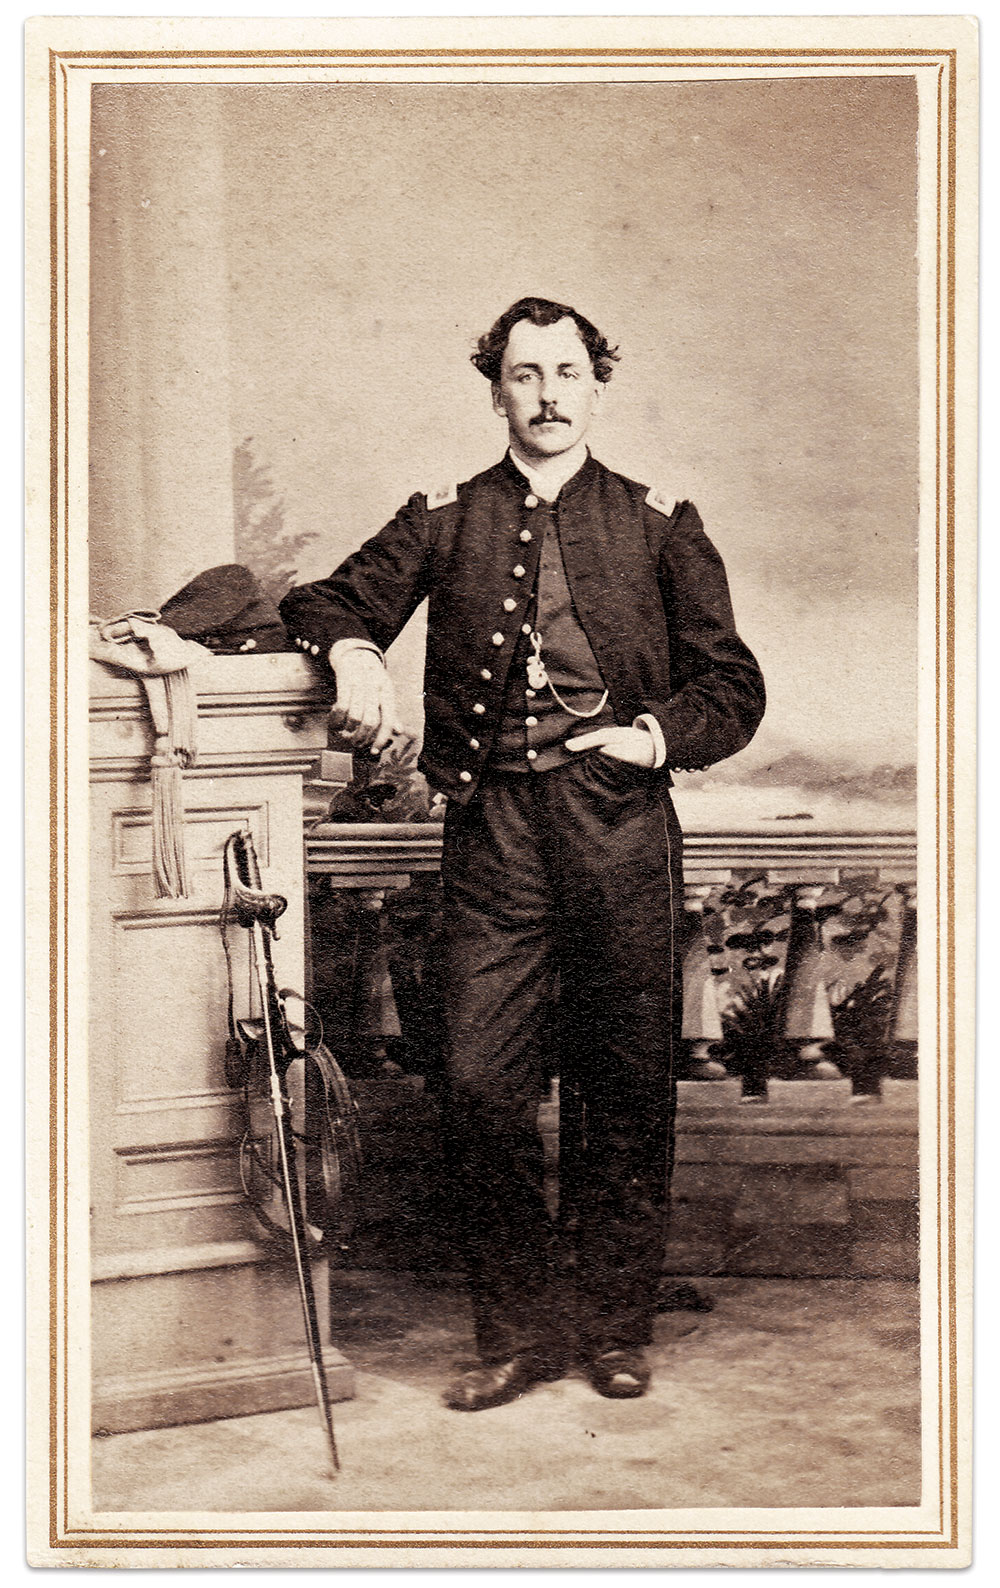 Carte de visite by Sam A. Cooley, Hilton Head, Folly Island and Beaufort, S.C., and Jacksonville, Fla. Marty Schoenfeld Collection.